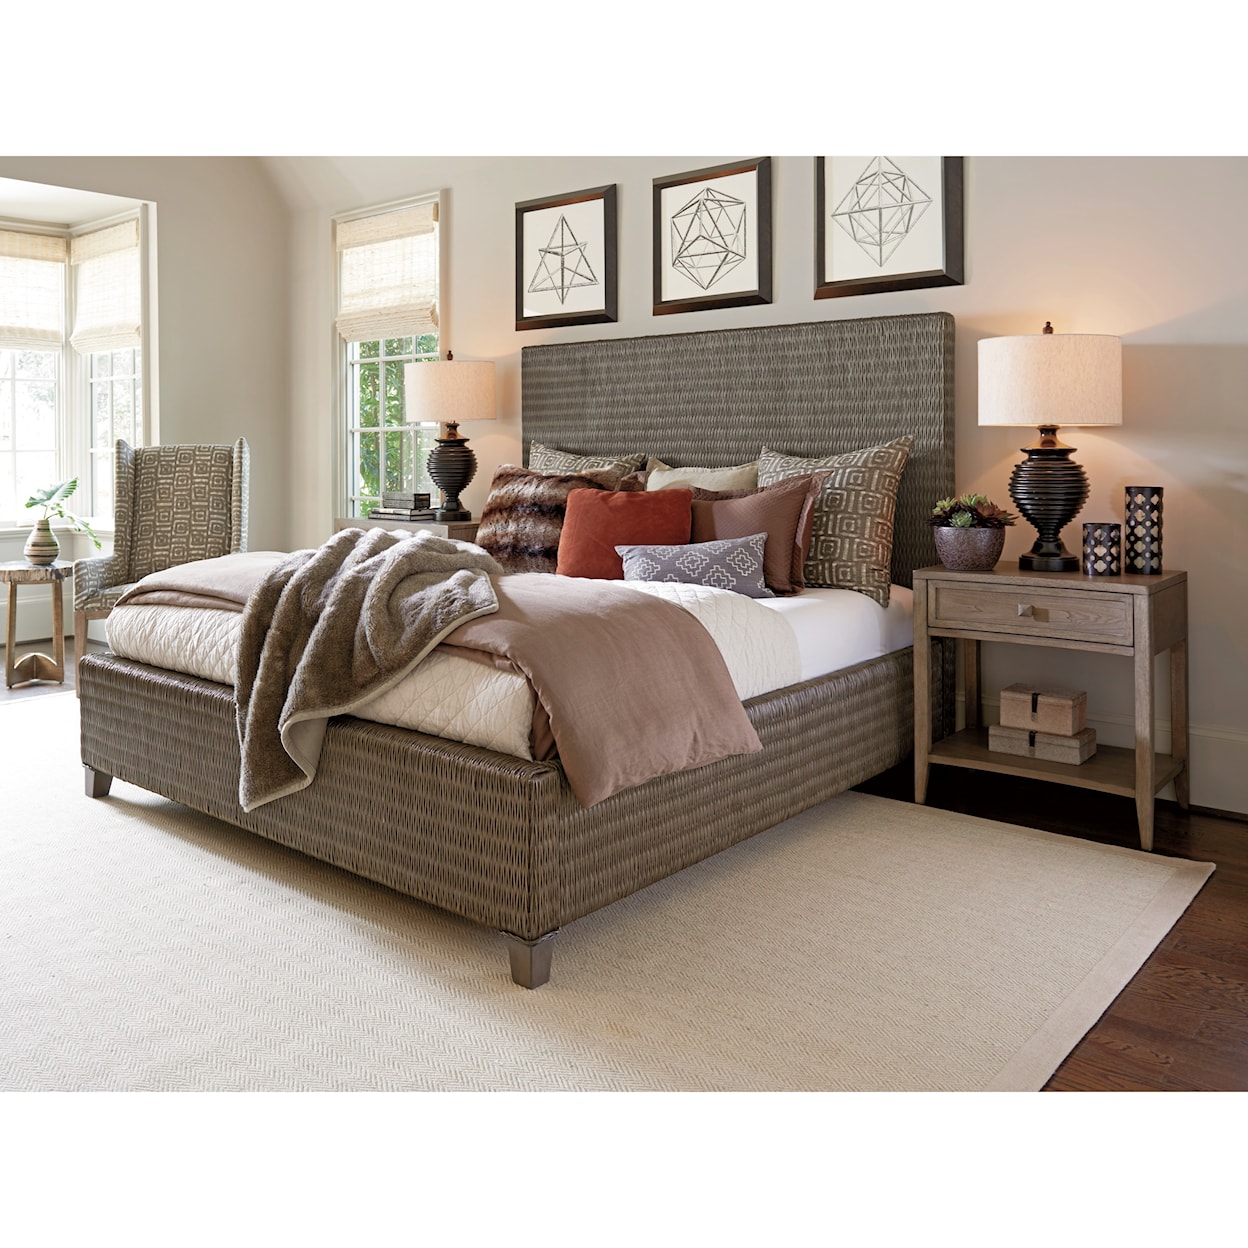 Tommy Bahama Home Cypress Point Queen Bedroom Group